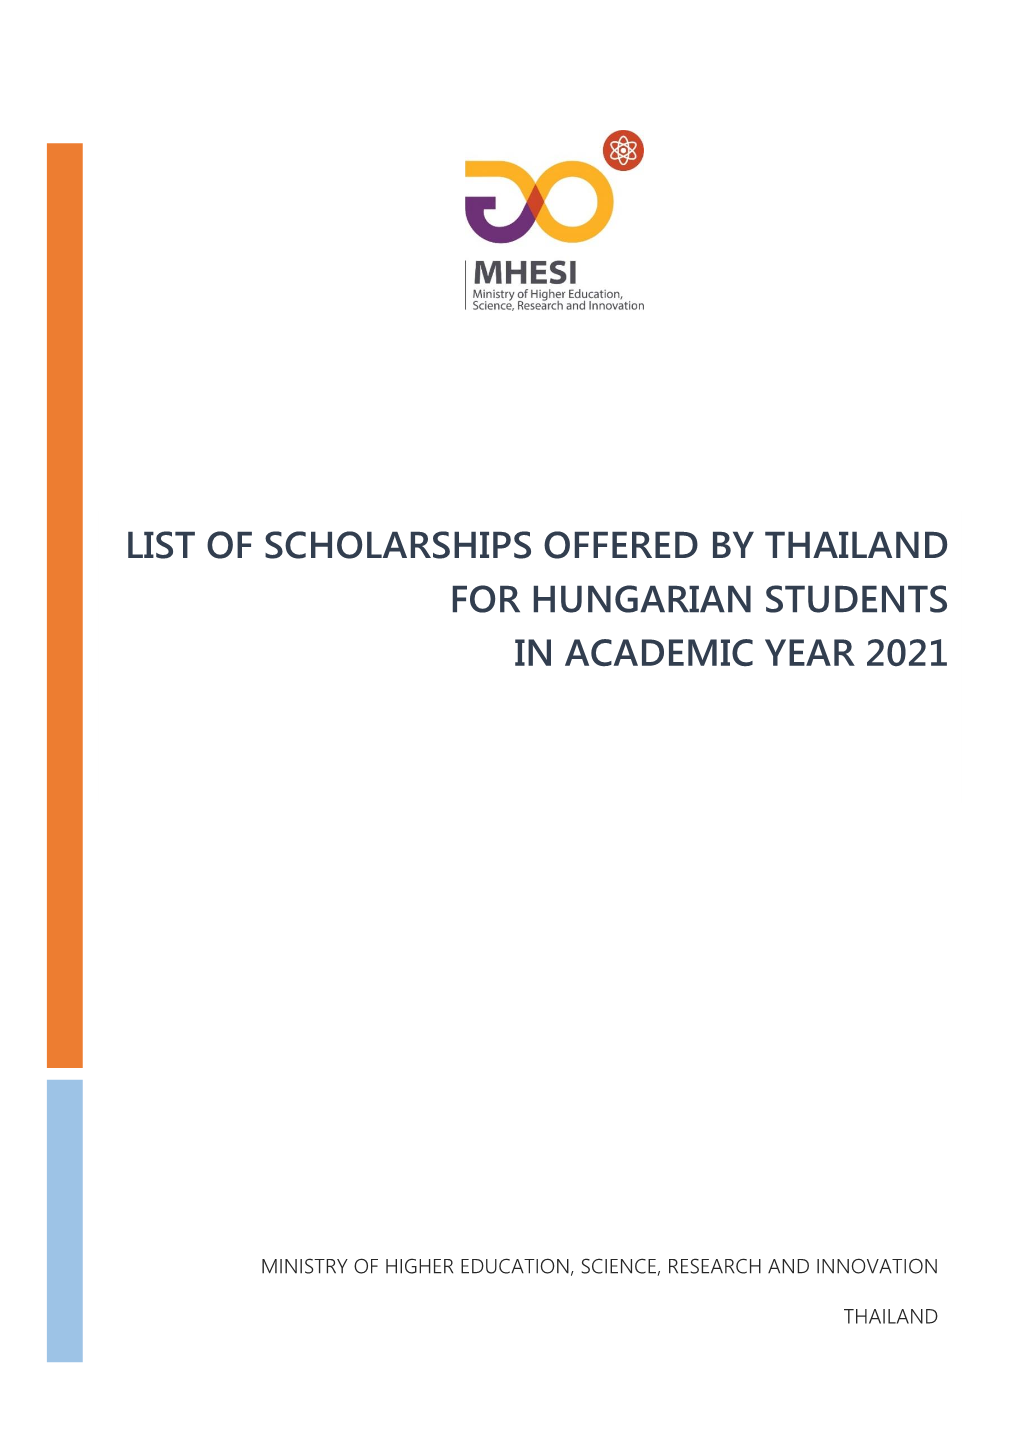 List of Thai Higher Education Institutions Allocating Scholarships to the Hungarian Students for the Academic YEAR 2021